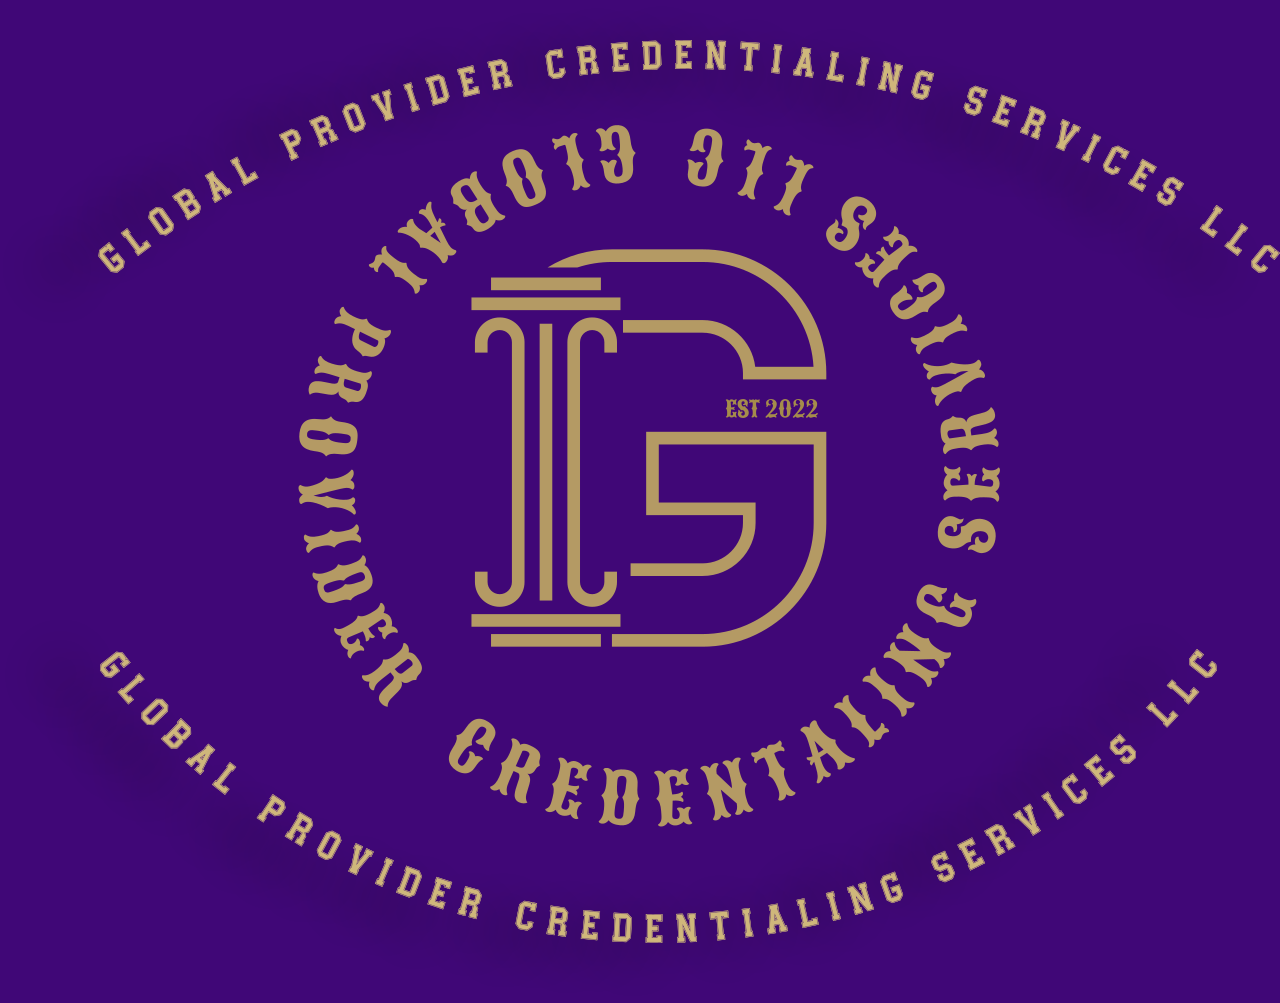 GLOBAL PROVIDER  CREDENTALING SERVICES LLC 's web page